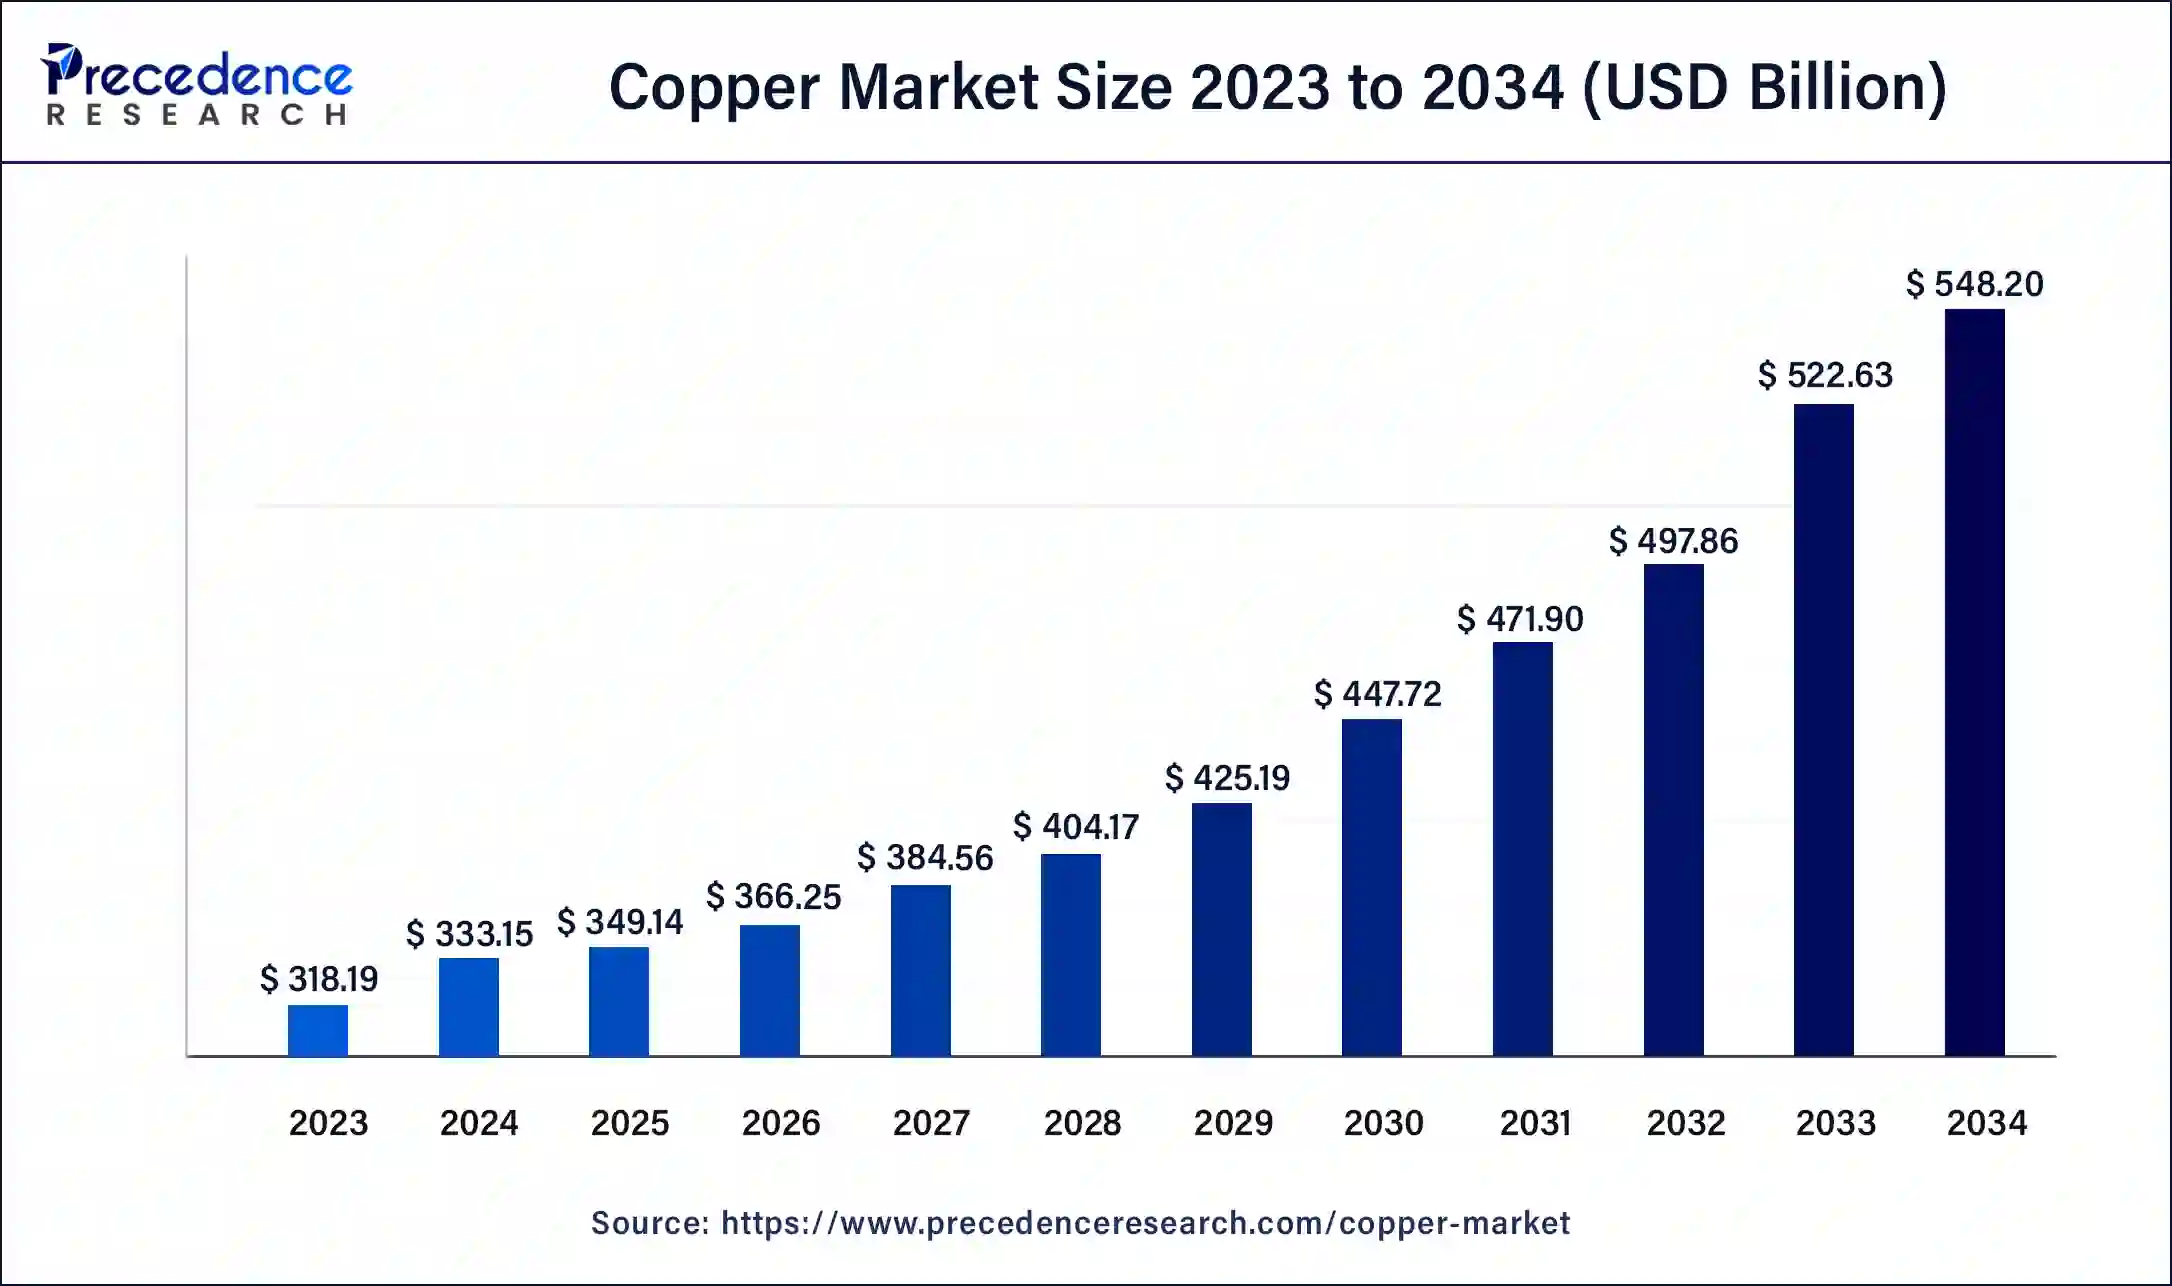 Copper Market Size 2024 To 2034